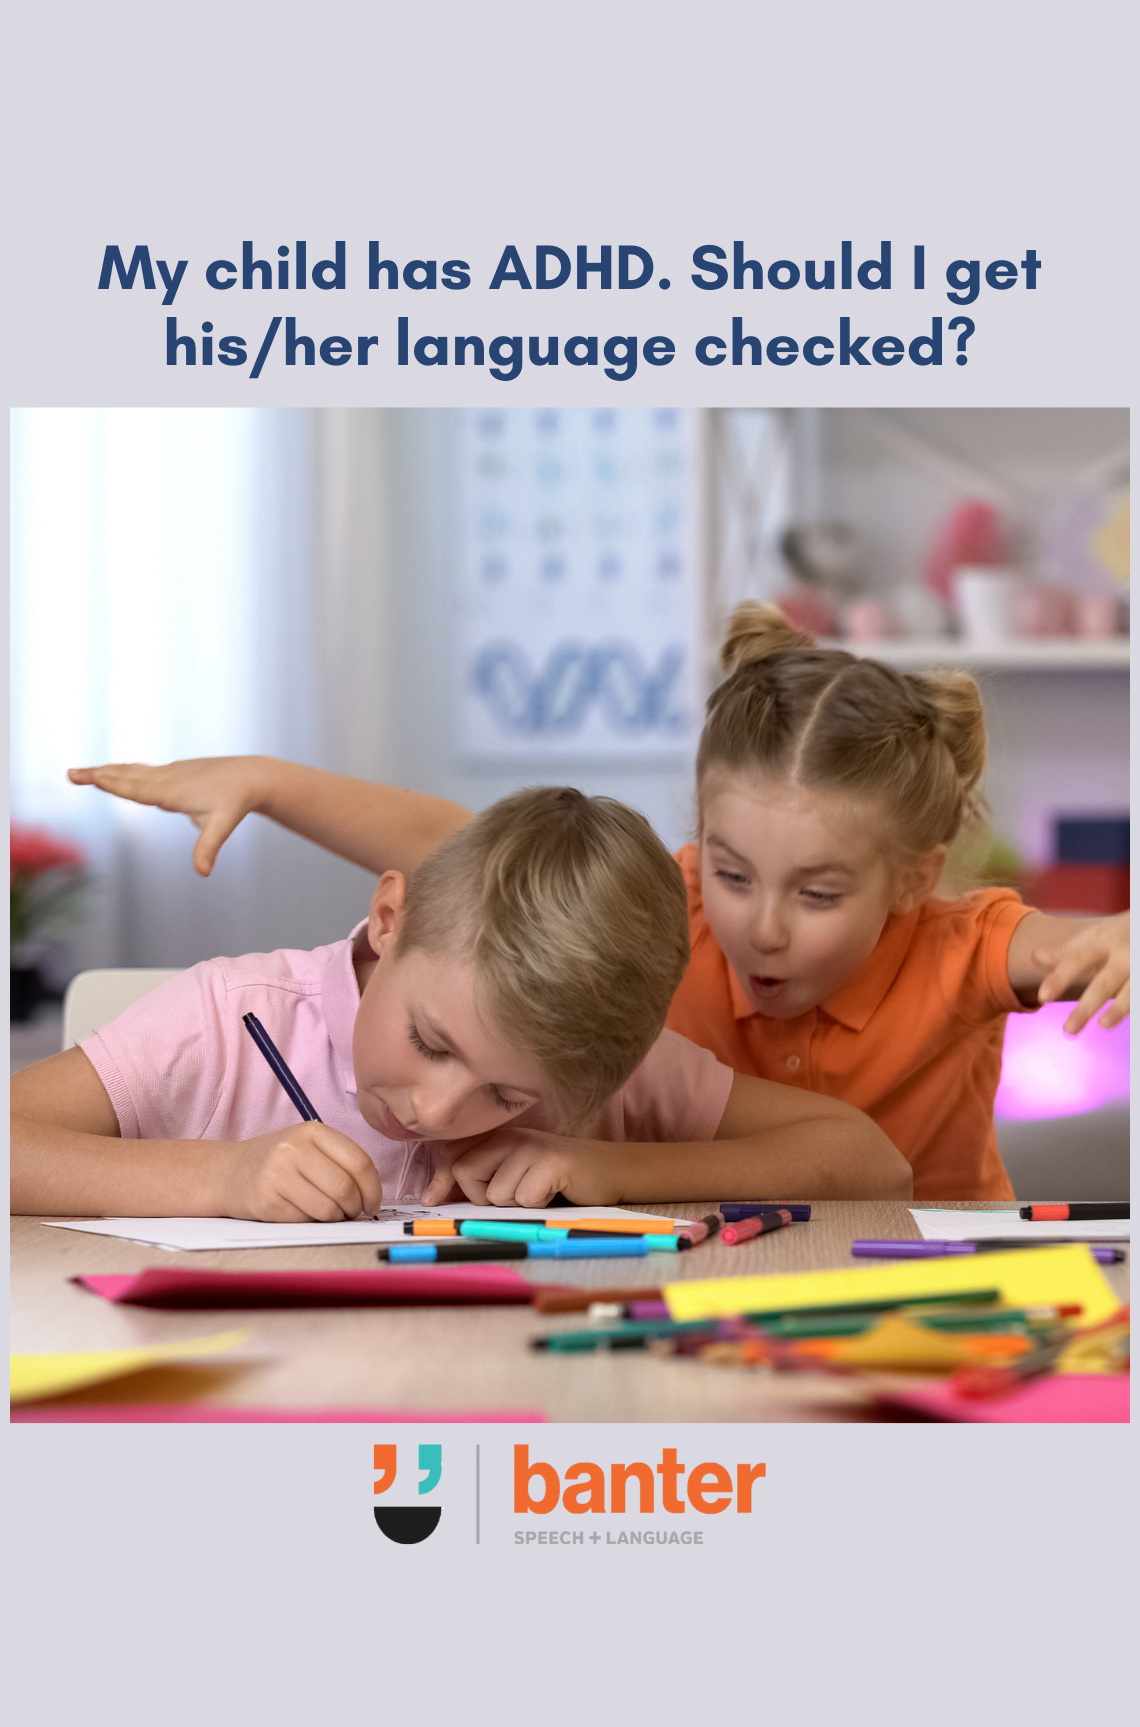 My child has ADHD. Should I get his or her language checked